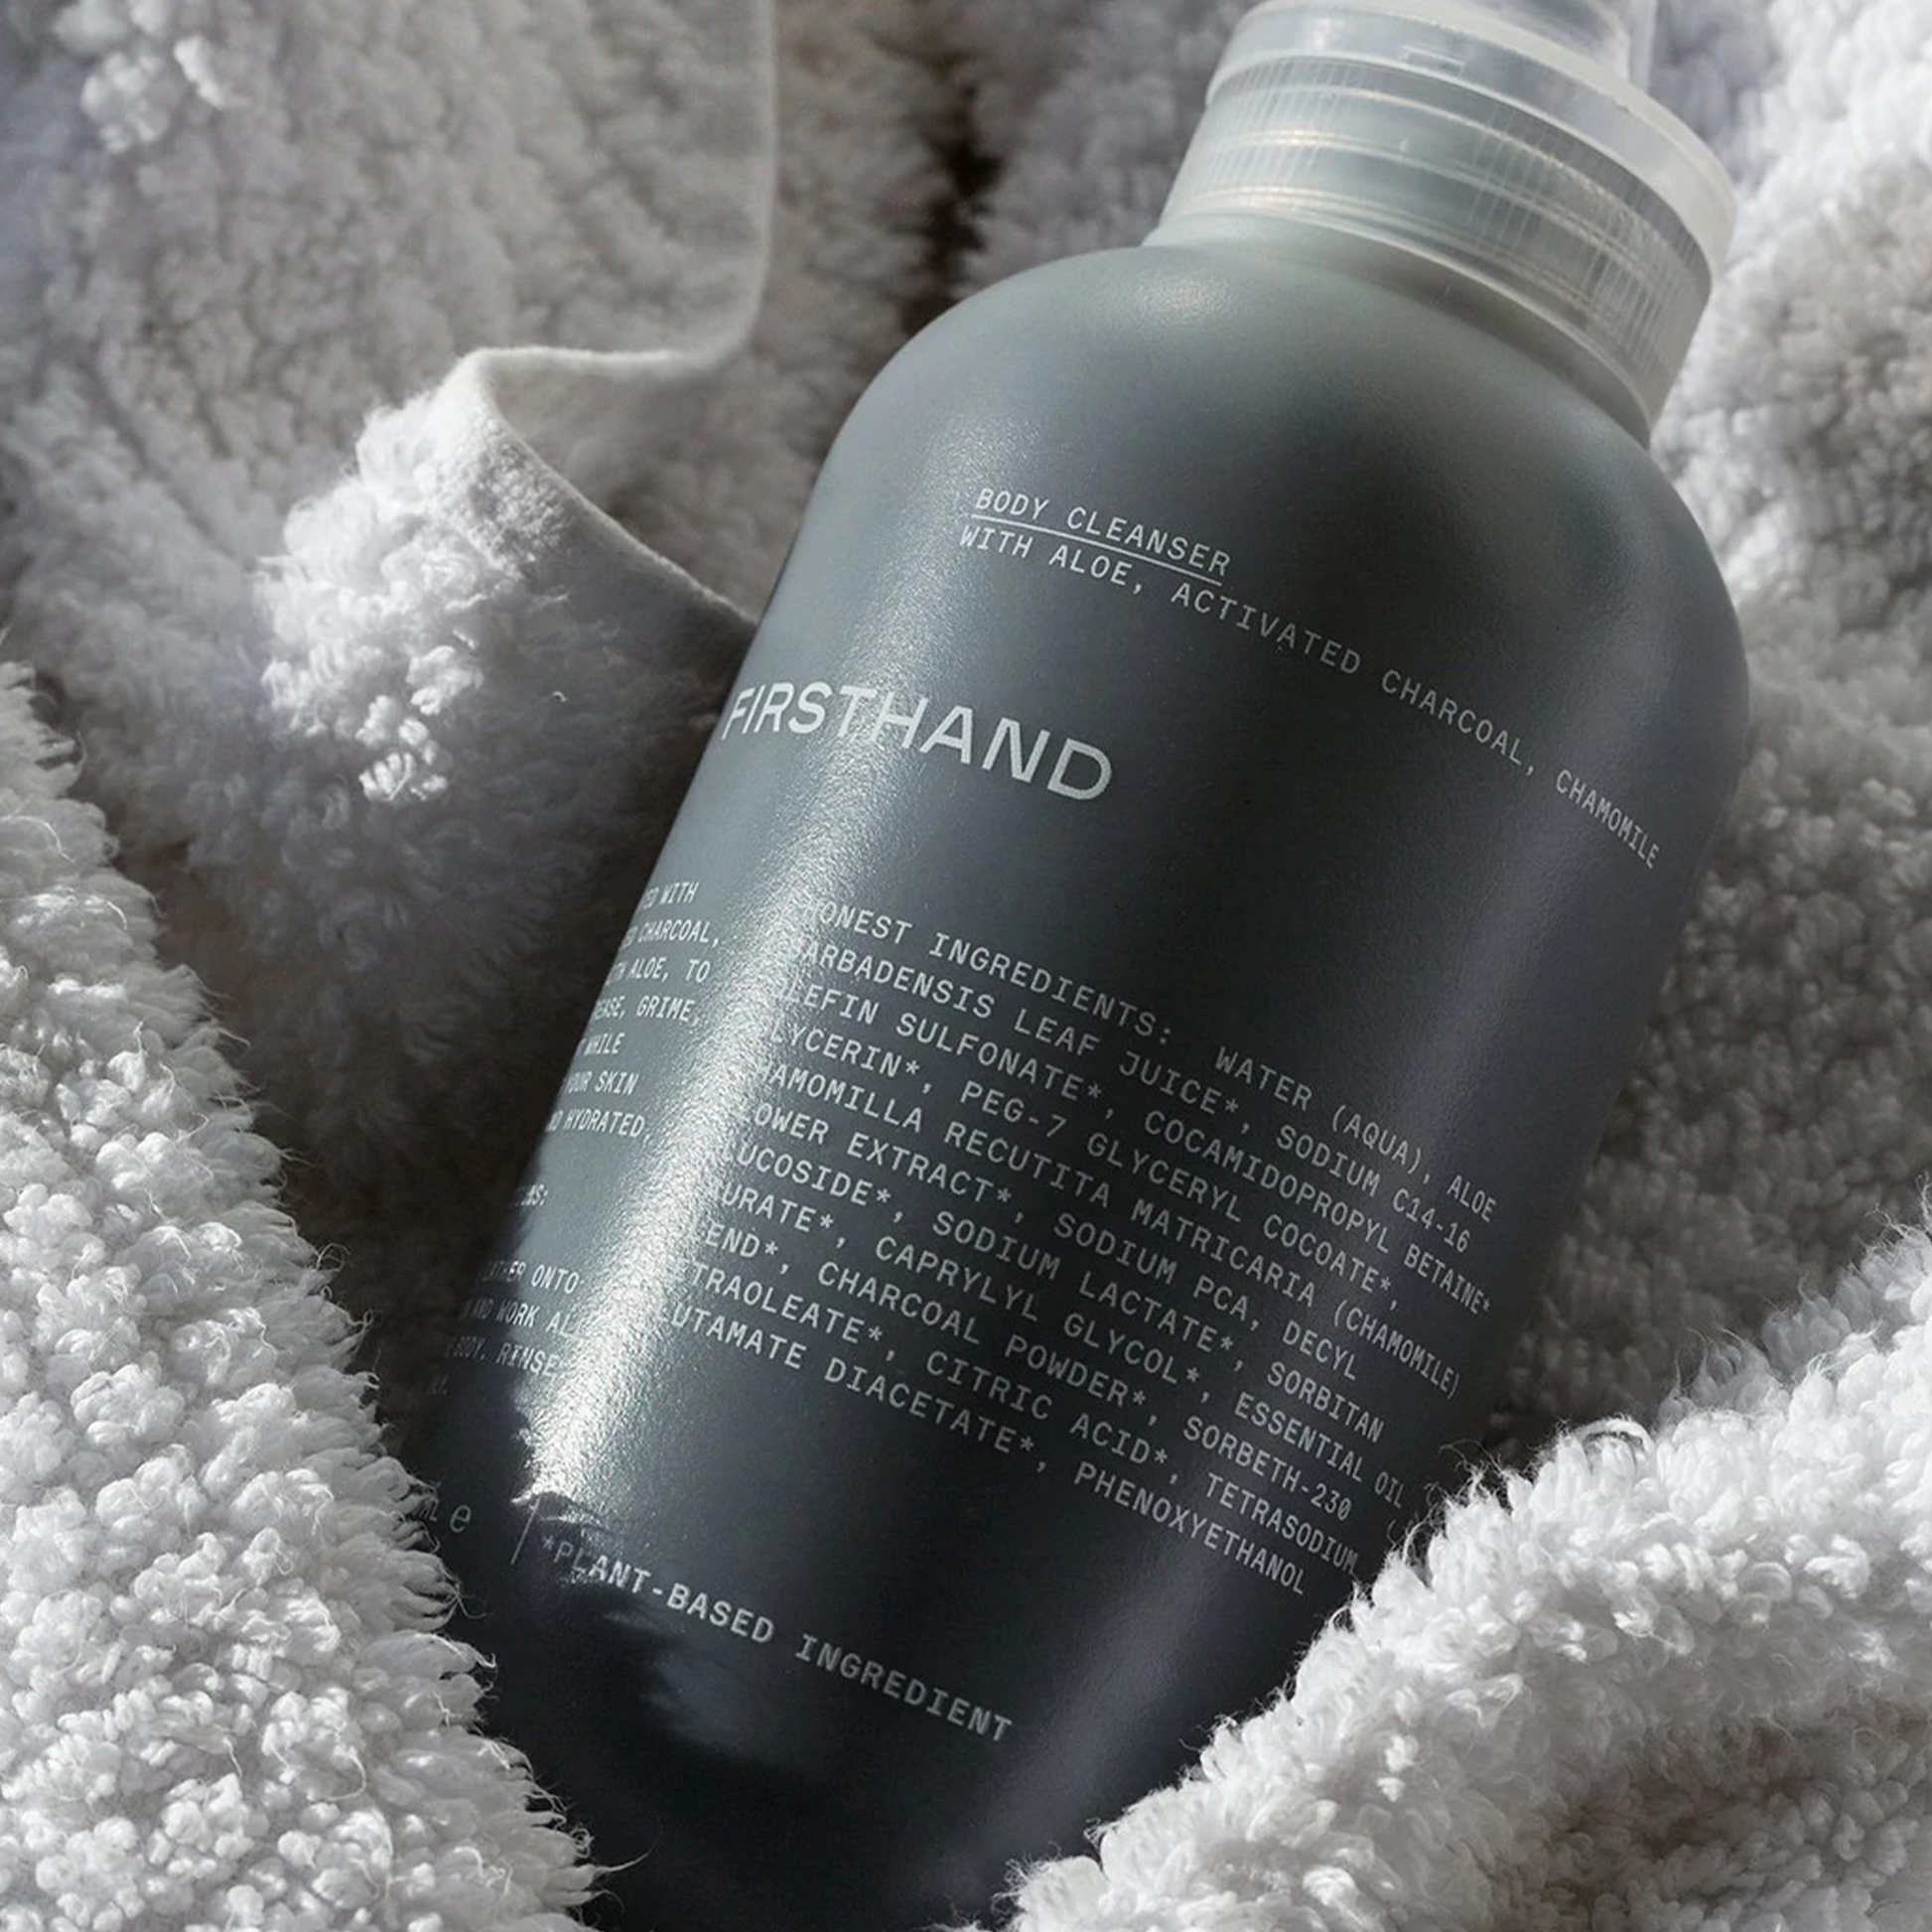 Firsthand Body Cleanser: A gentle yet thorough cleansing solution - this activated charcoal cleanser effectively strips away excess oils and dirt on the body while chamomile extract and aloe vera soften and soothe the skin to leave you feeling revived and refreshed.